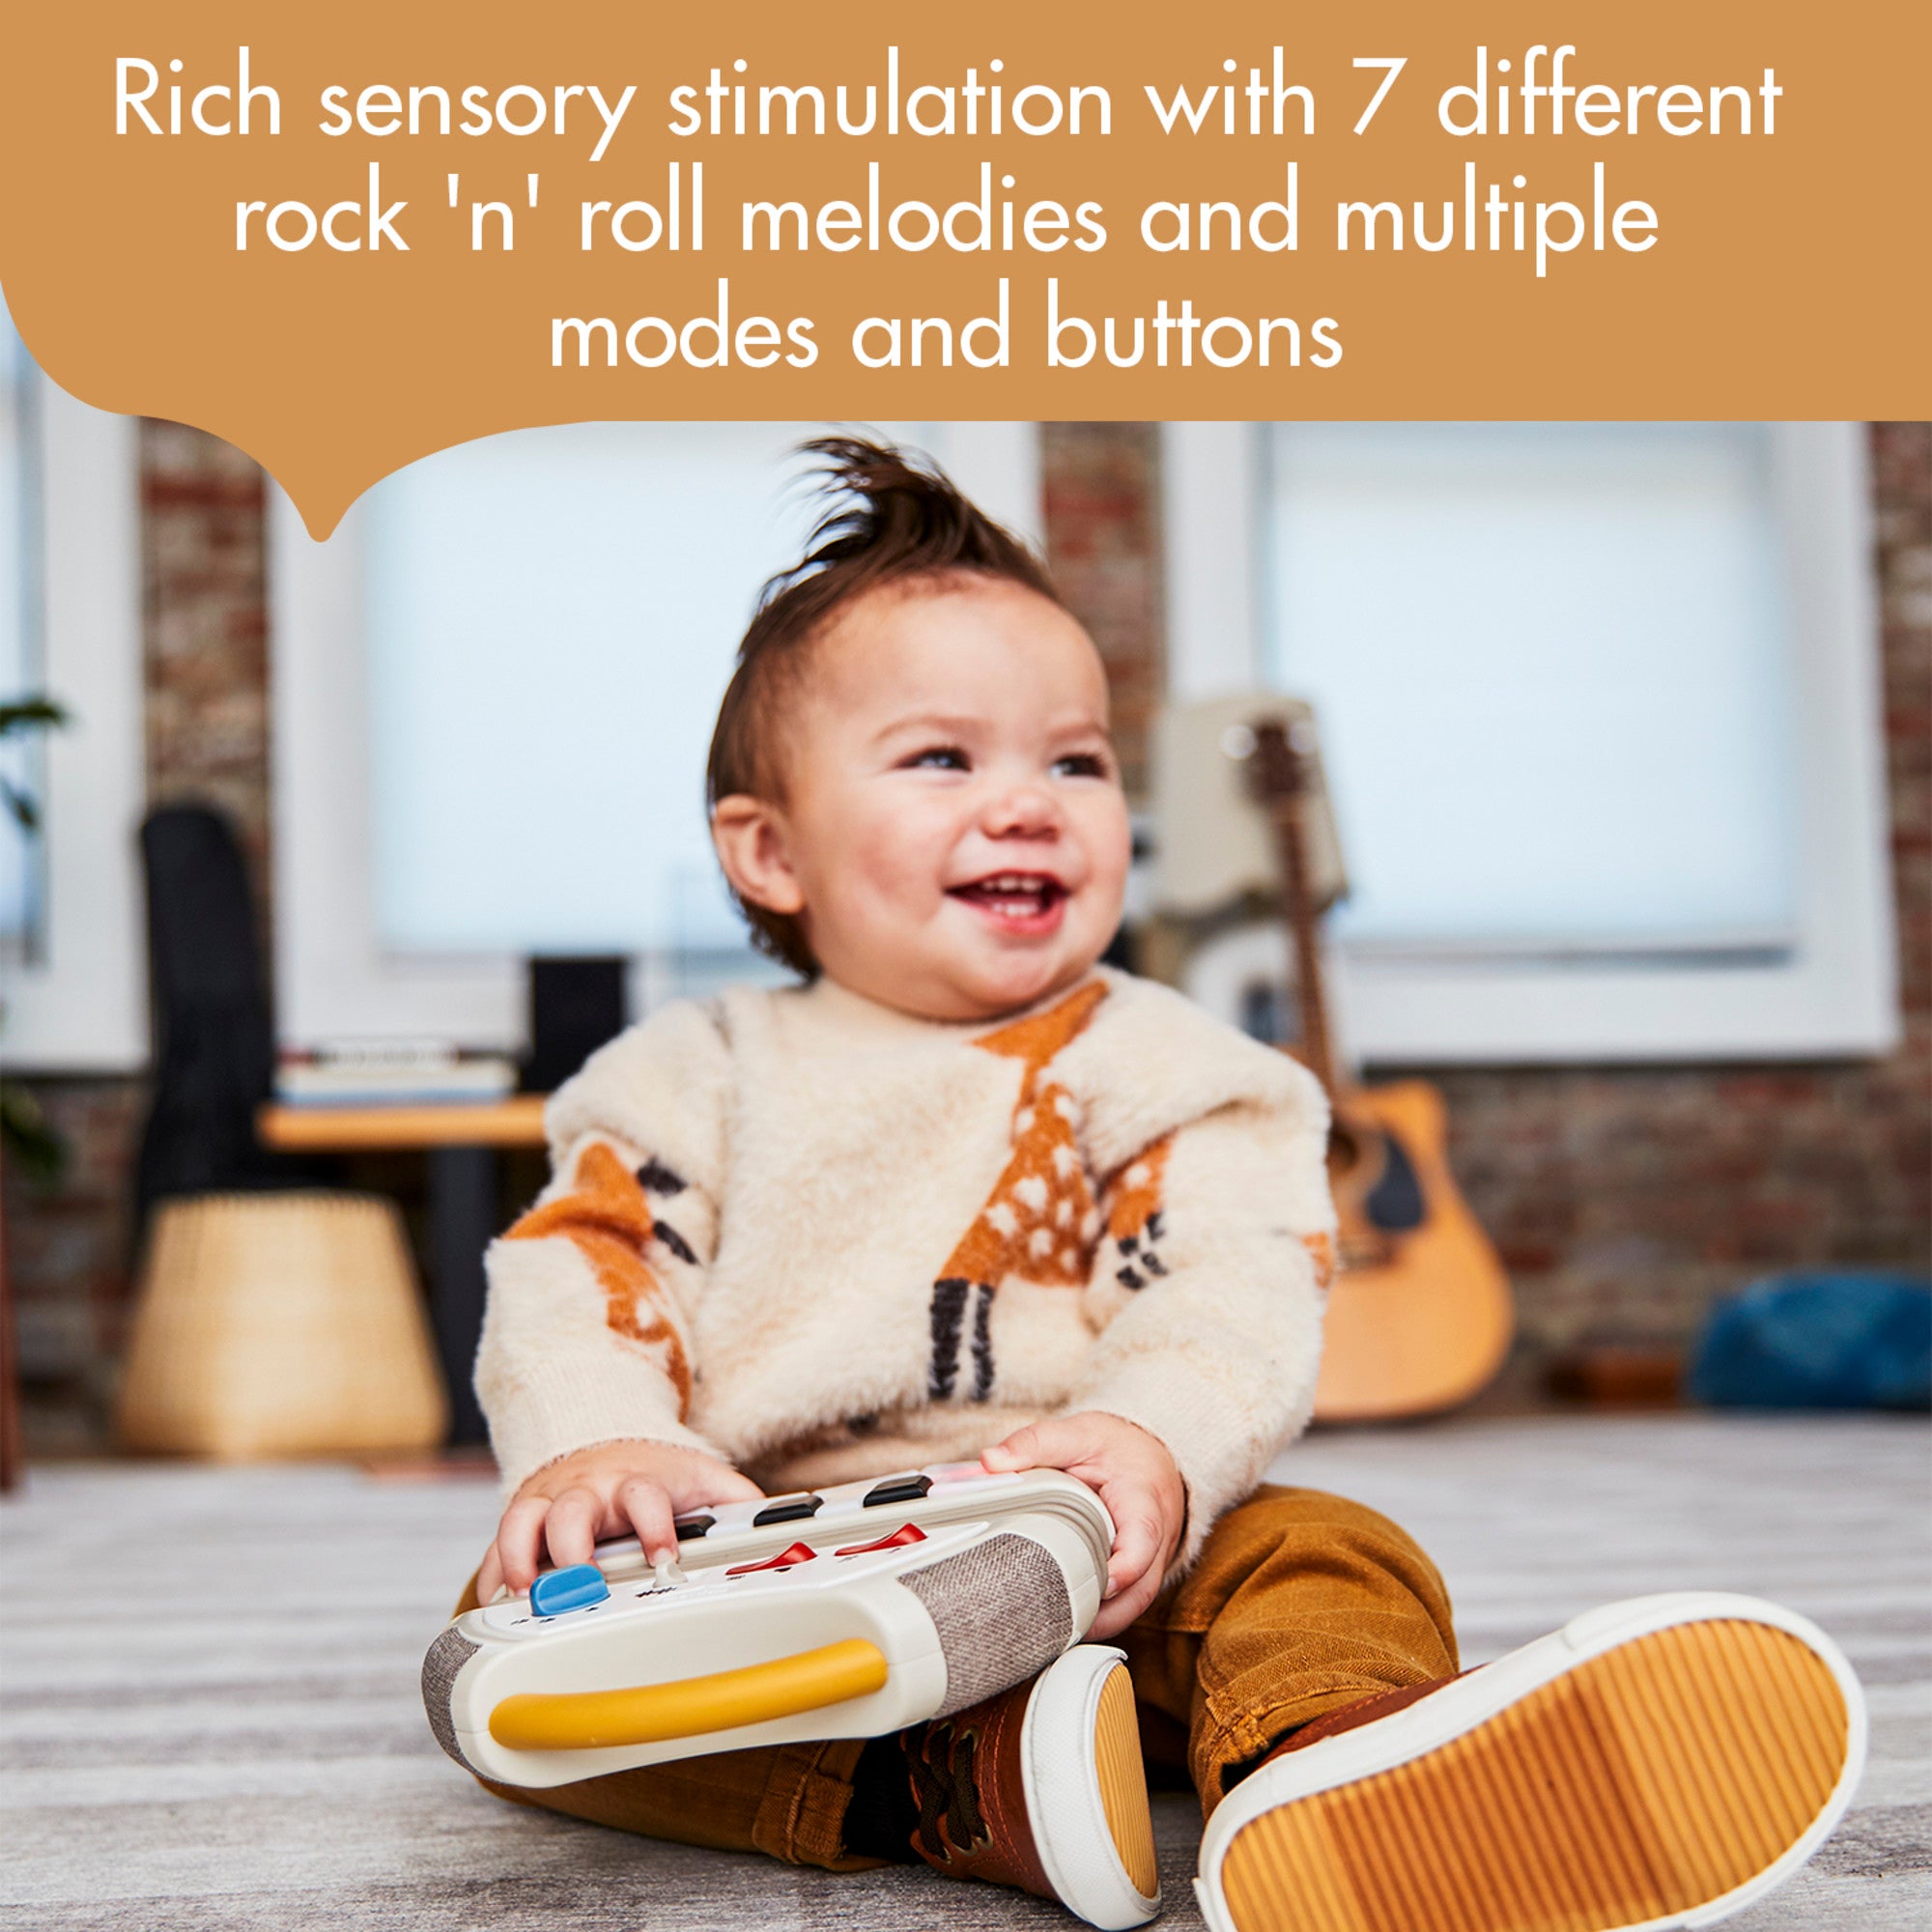 Tiny Rockers Accordion - Rich sensory stimulation with 7 different rock 'n' roll melodies and multiple modes and buttons